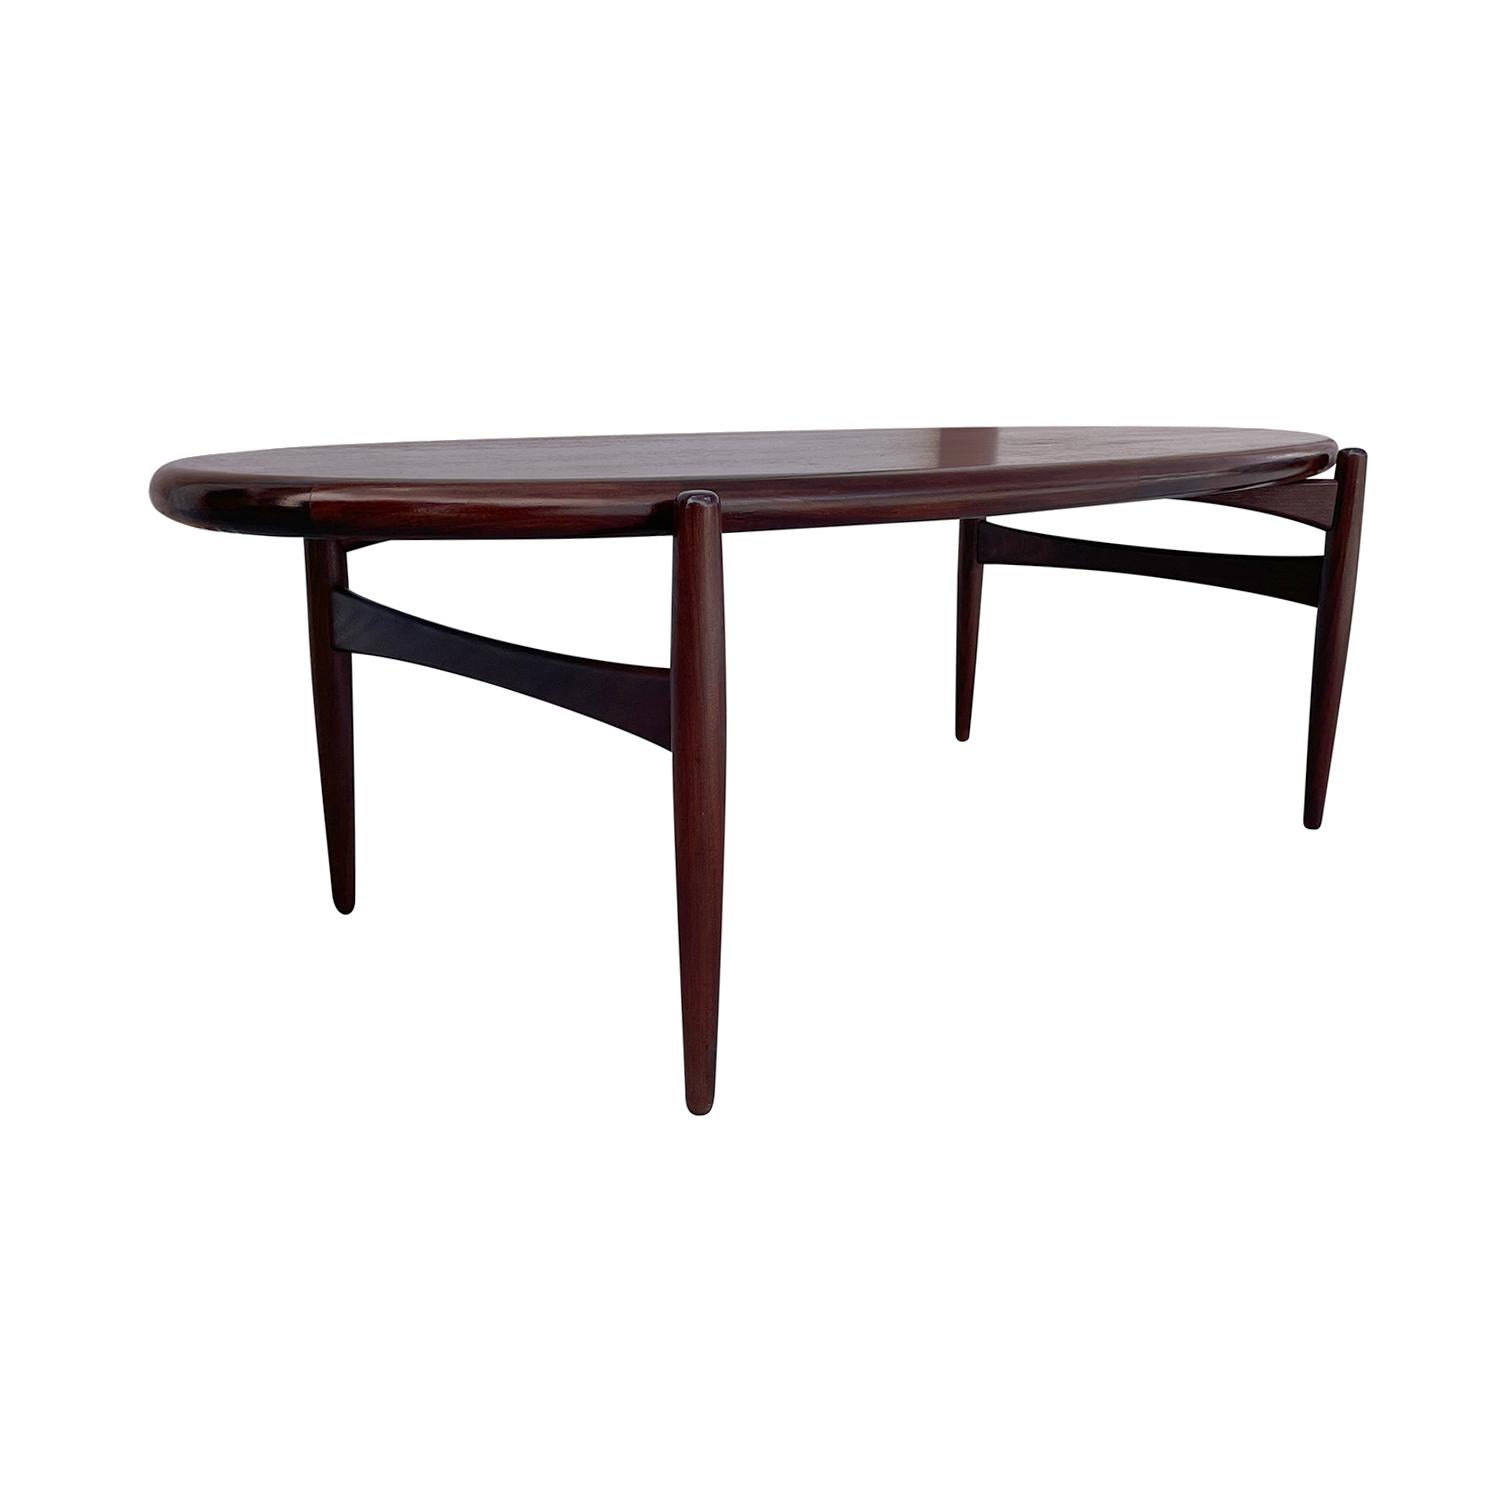 20th Century Brown Danish Teakwood Oval Sofa Table, Scandinavian Coffee Table In Good Condition For Sale In West Palm Beach, FL